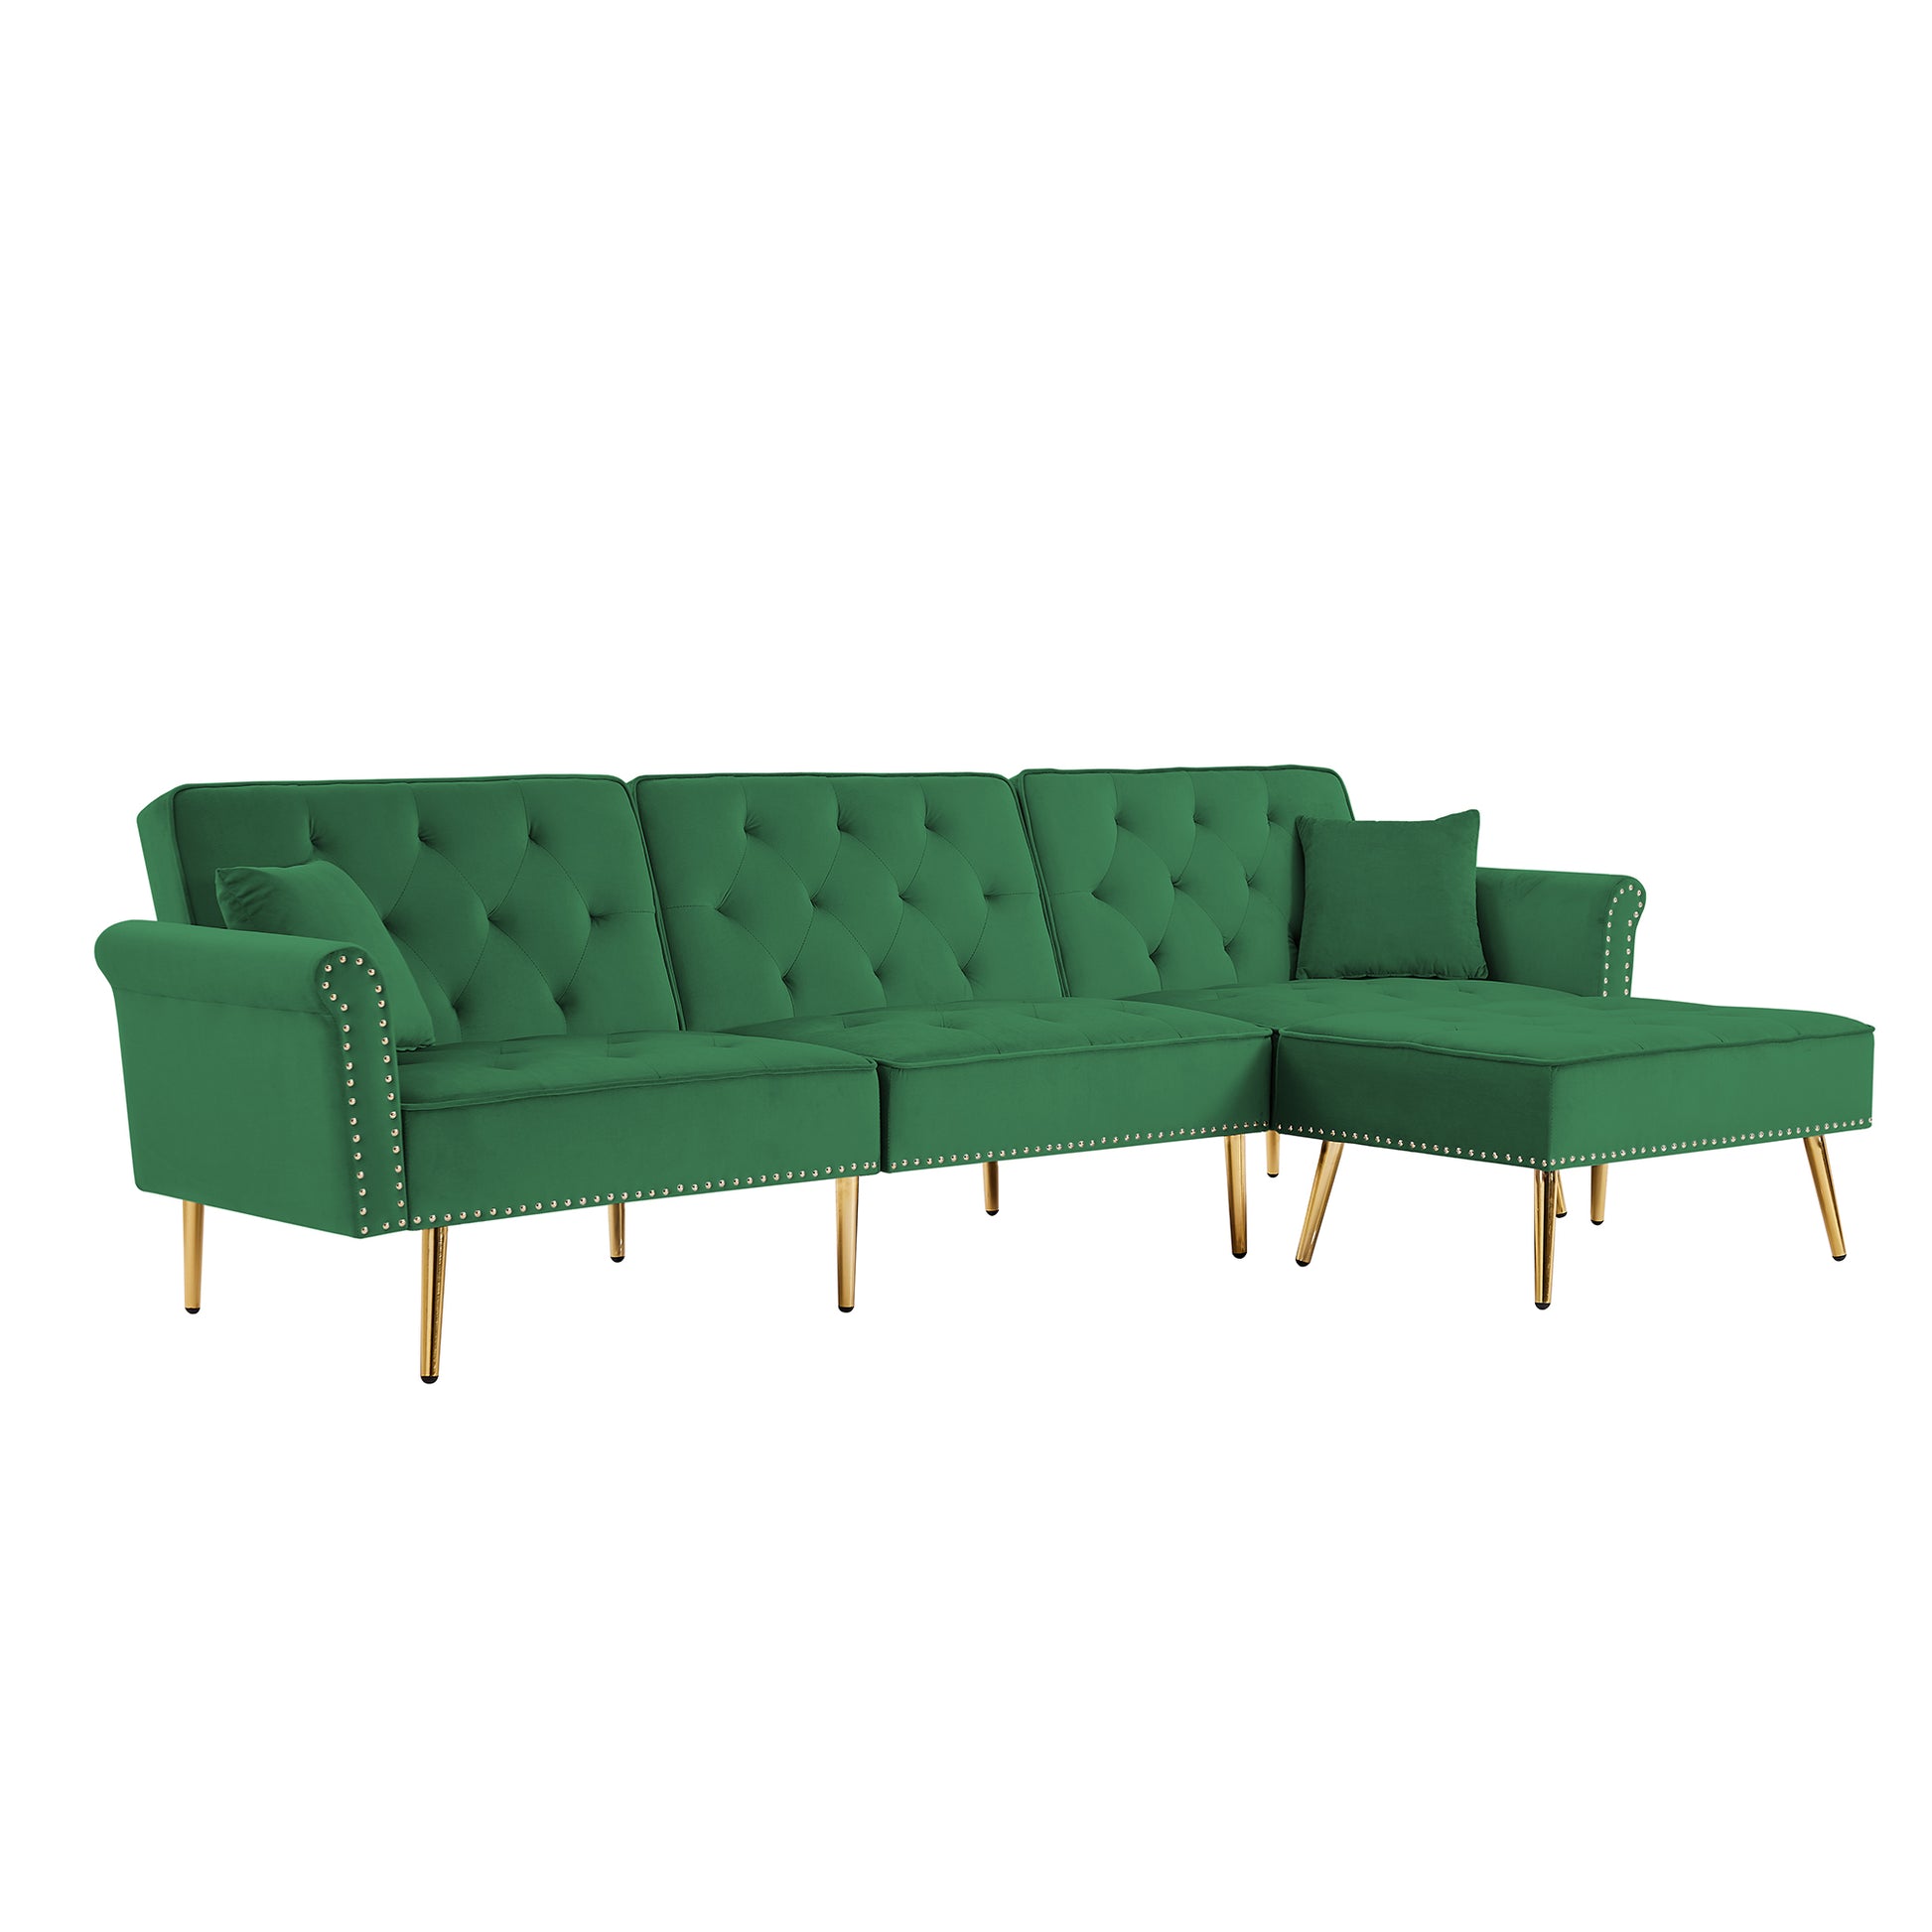 Modern Velvet Upholstered Reversible Sectional Sofa Bed , L-Shaped Couch with Movable Ottoman and Nailhead Trim For Living Room. (Green) - Enova Luxe Home Store